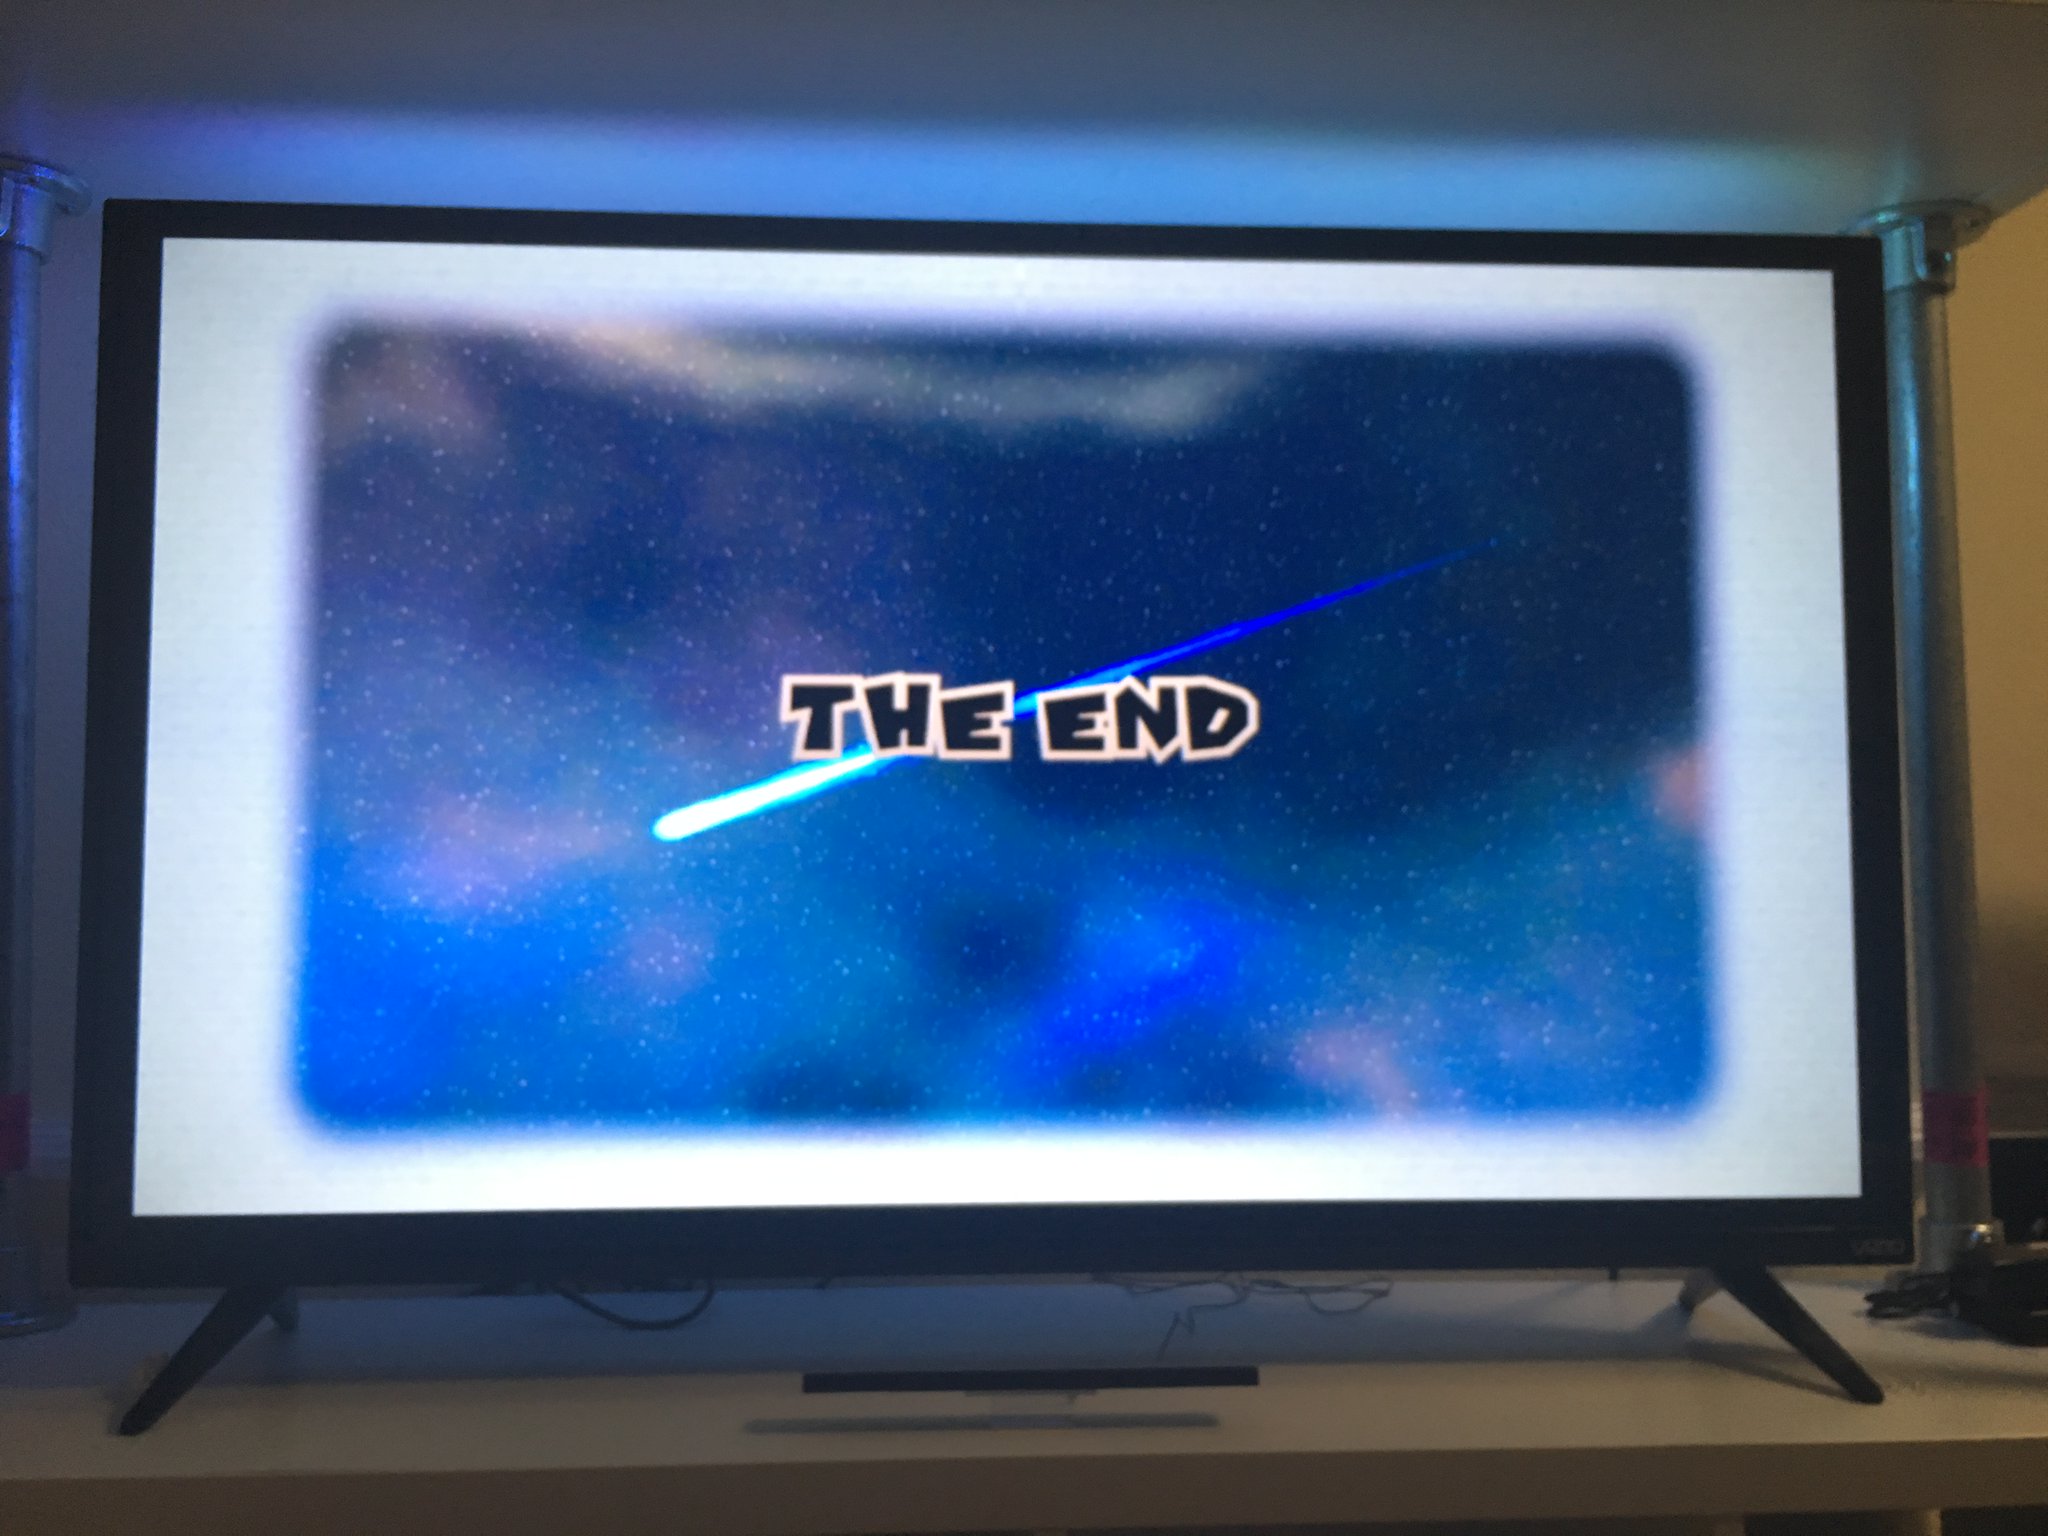 A photo of a TV showing the end game screen.